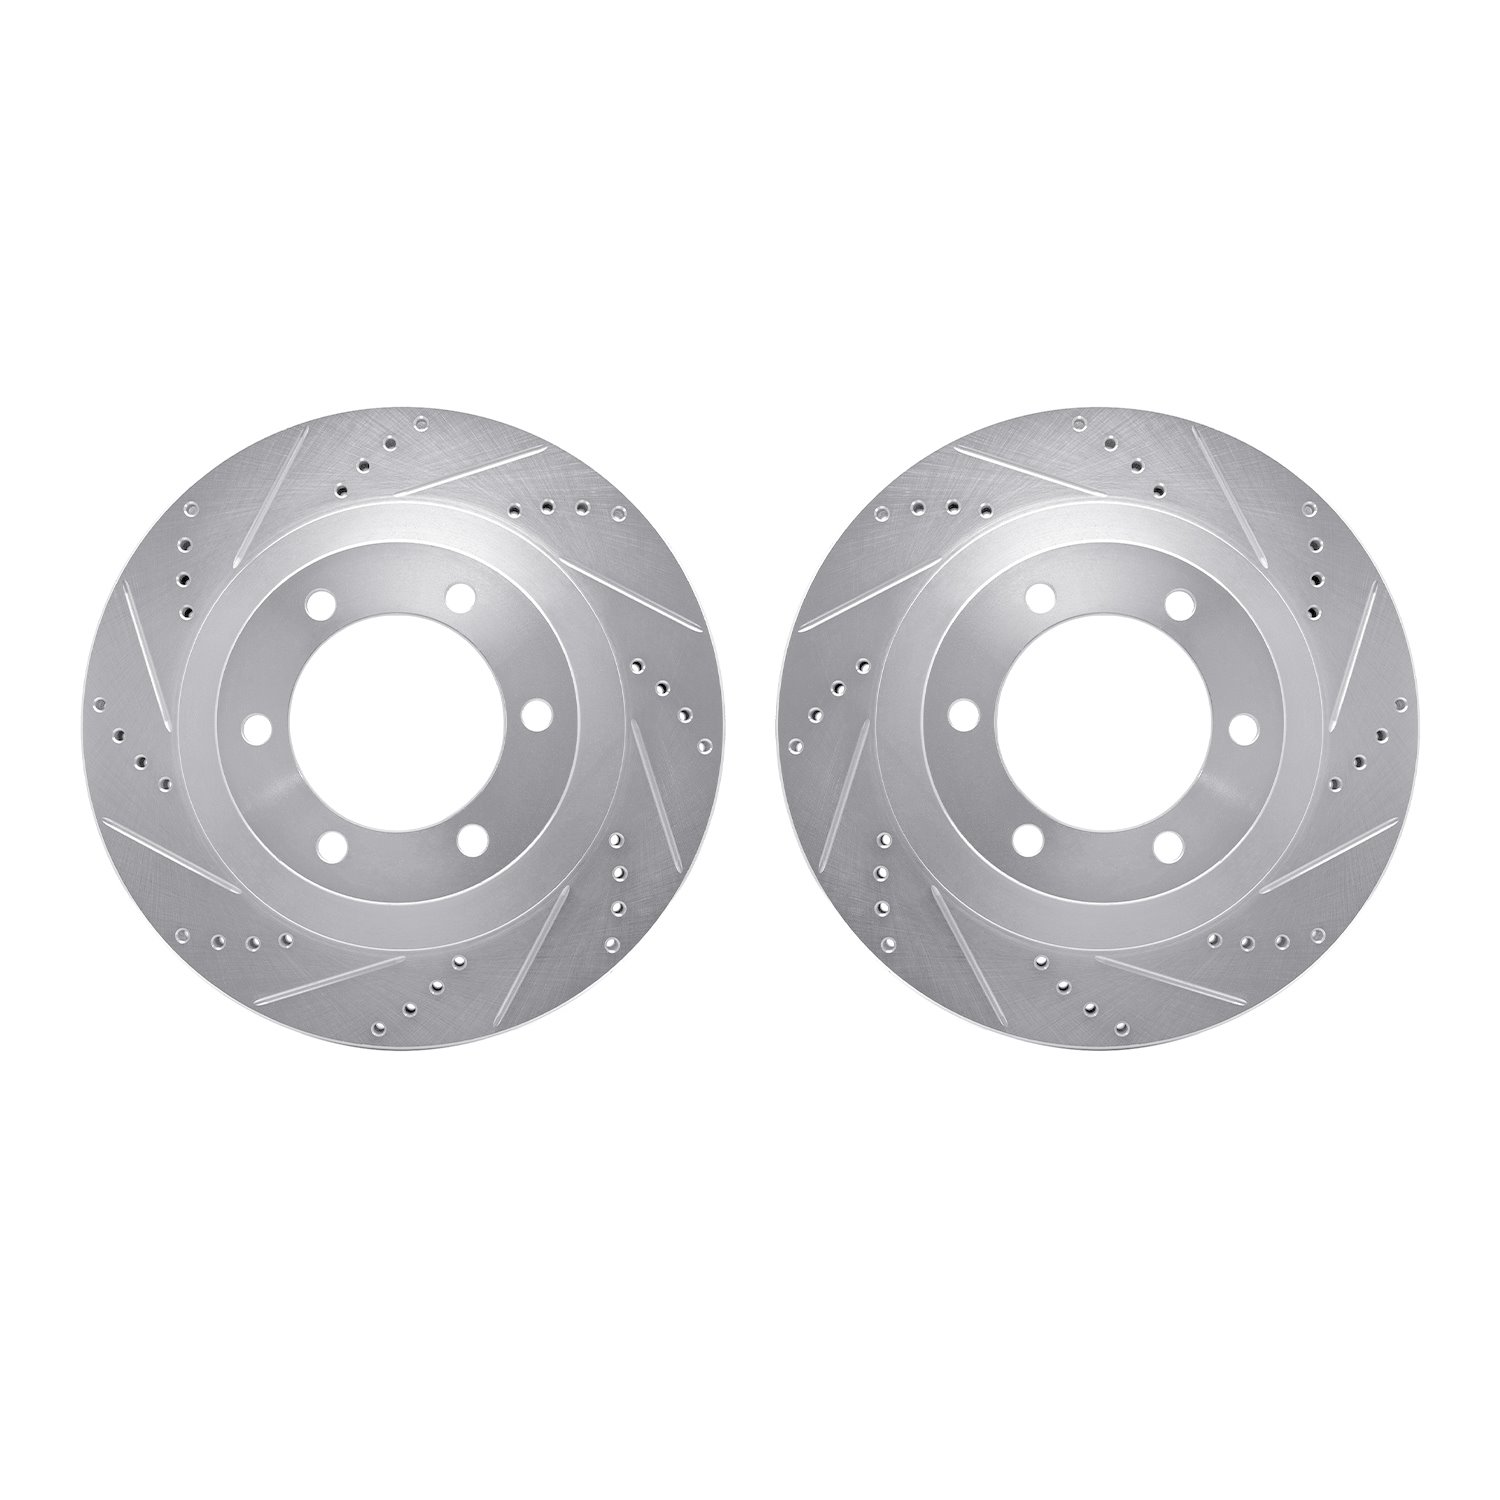 Drilled/Slotted Brake Rotors [Silver], 2003-2009 Lexus/Toyota/Scion